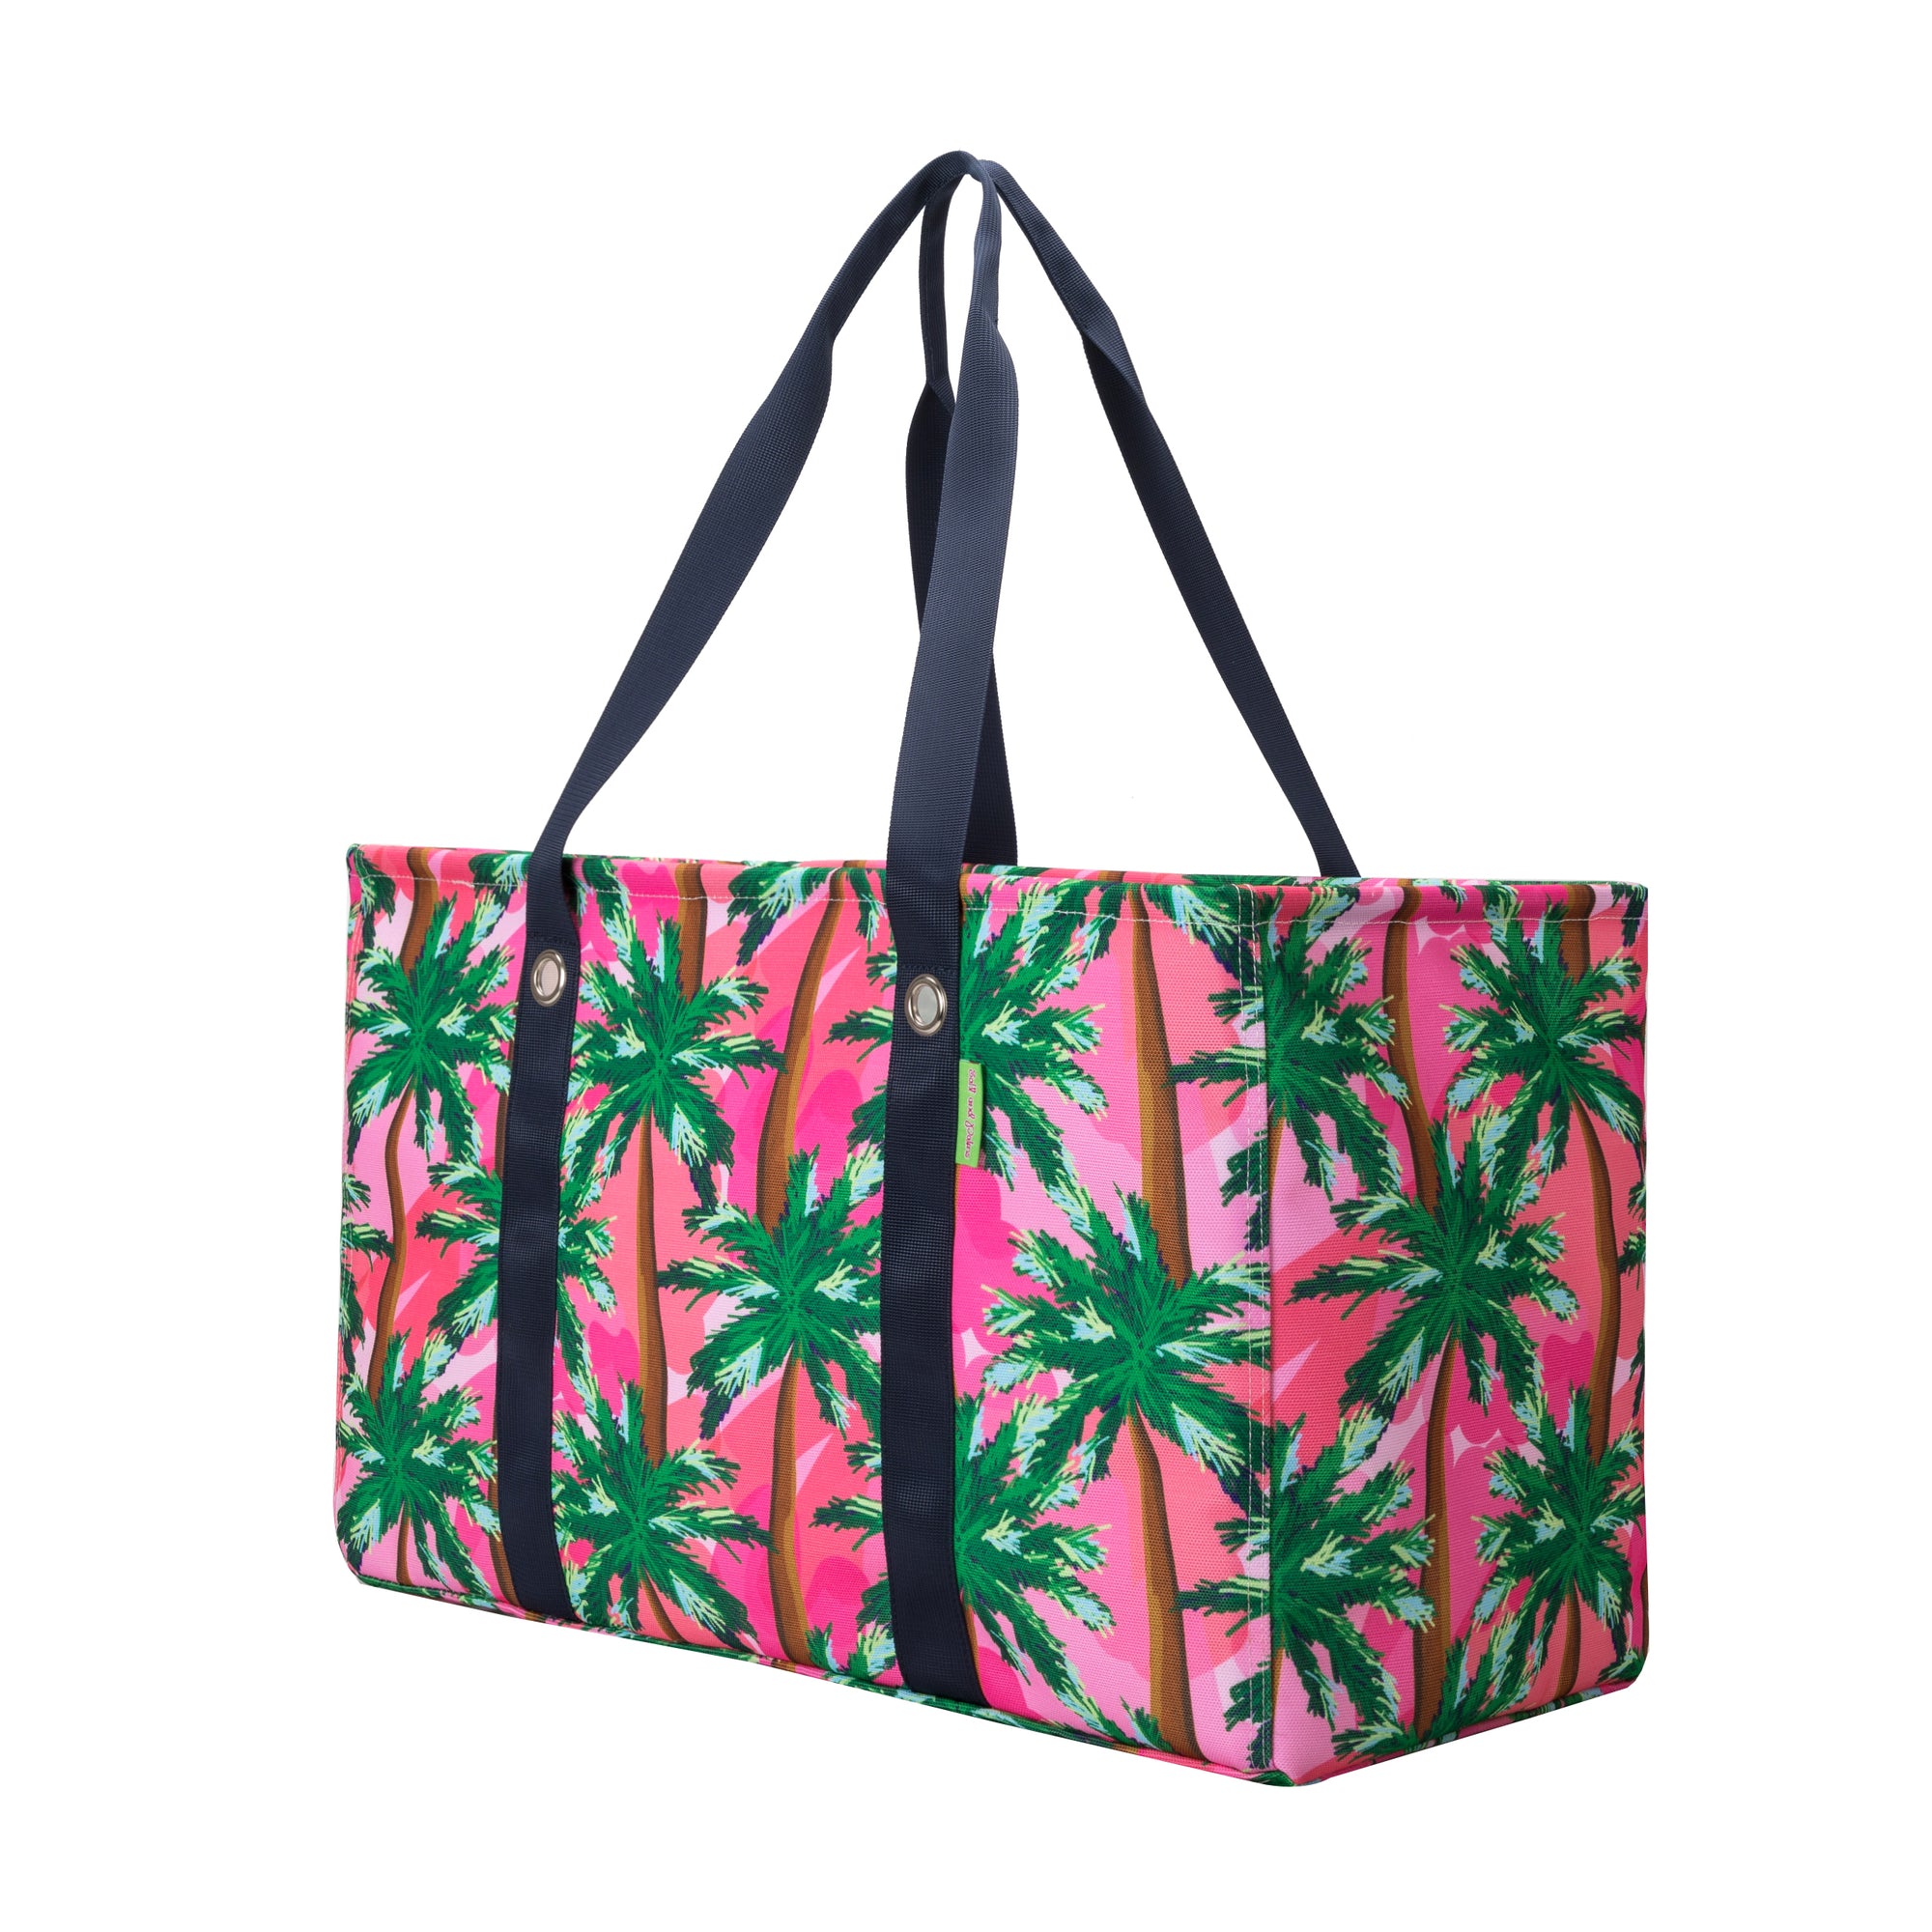 Salt & Palms Utility Tote - Sunset (Palm Trees) - Piper Layne Bags